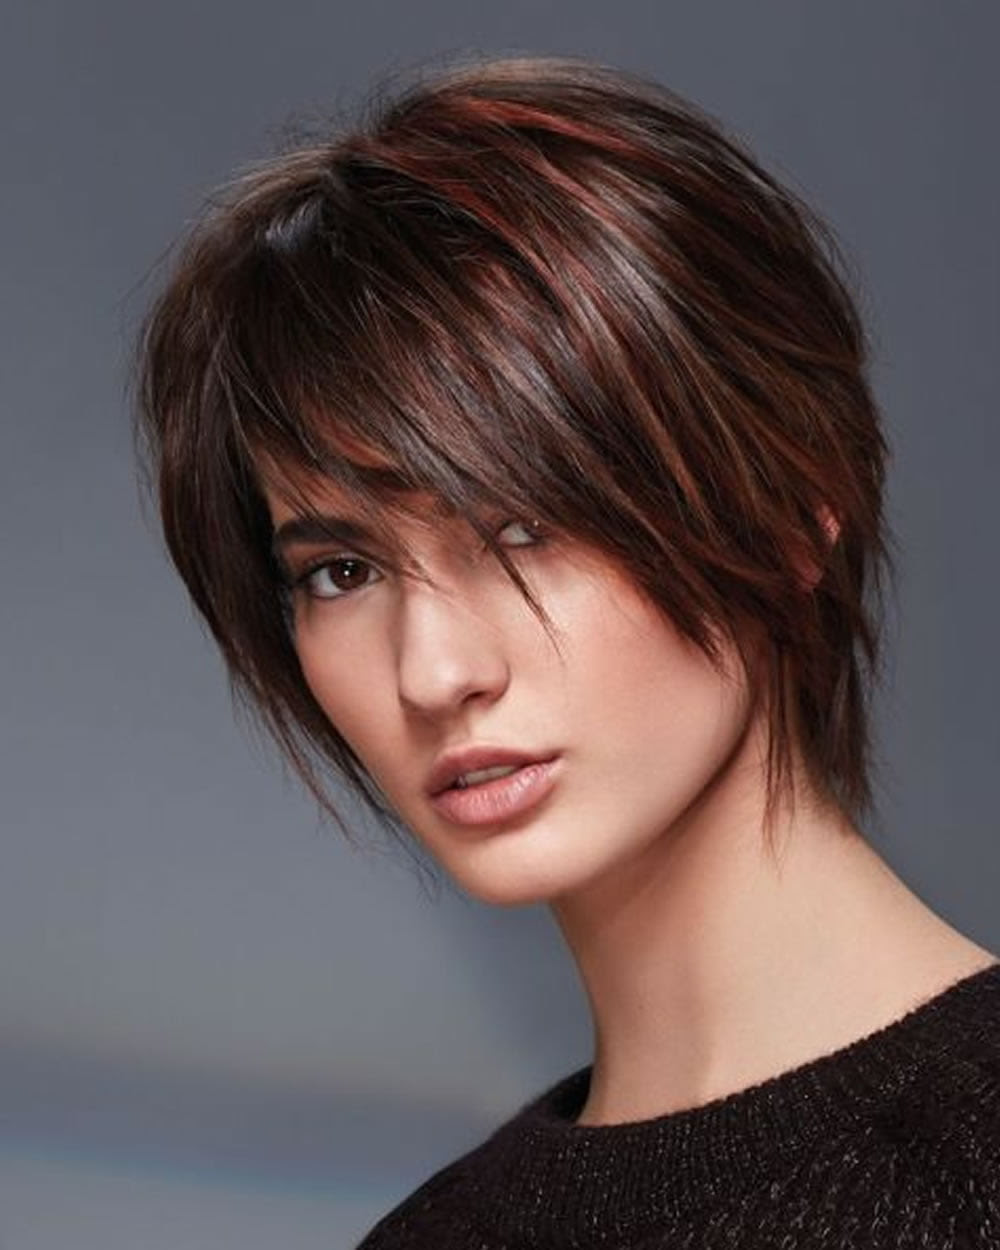 36+ new style short hairstyles 2019 female for round face